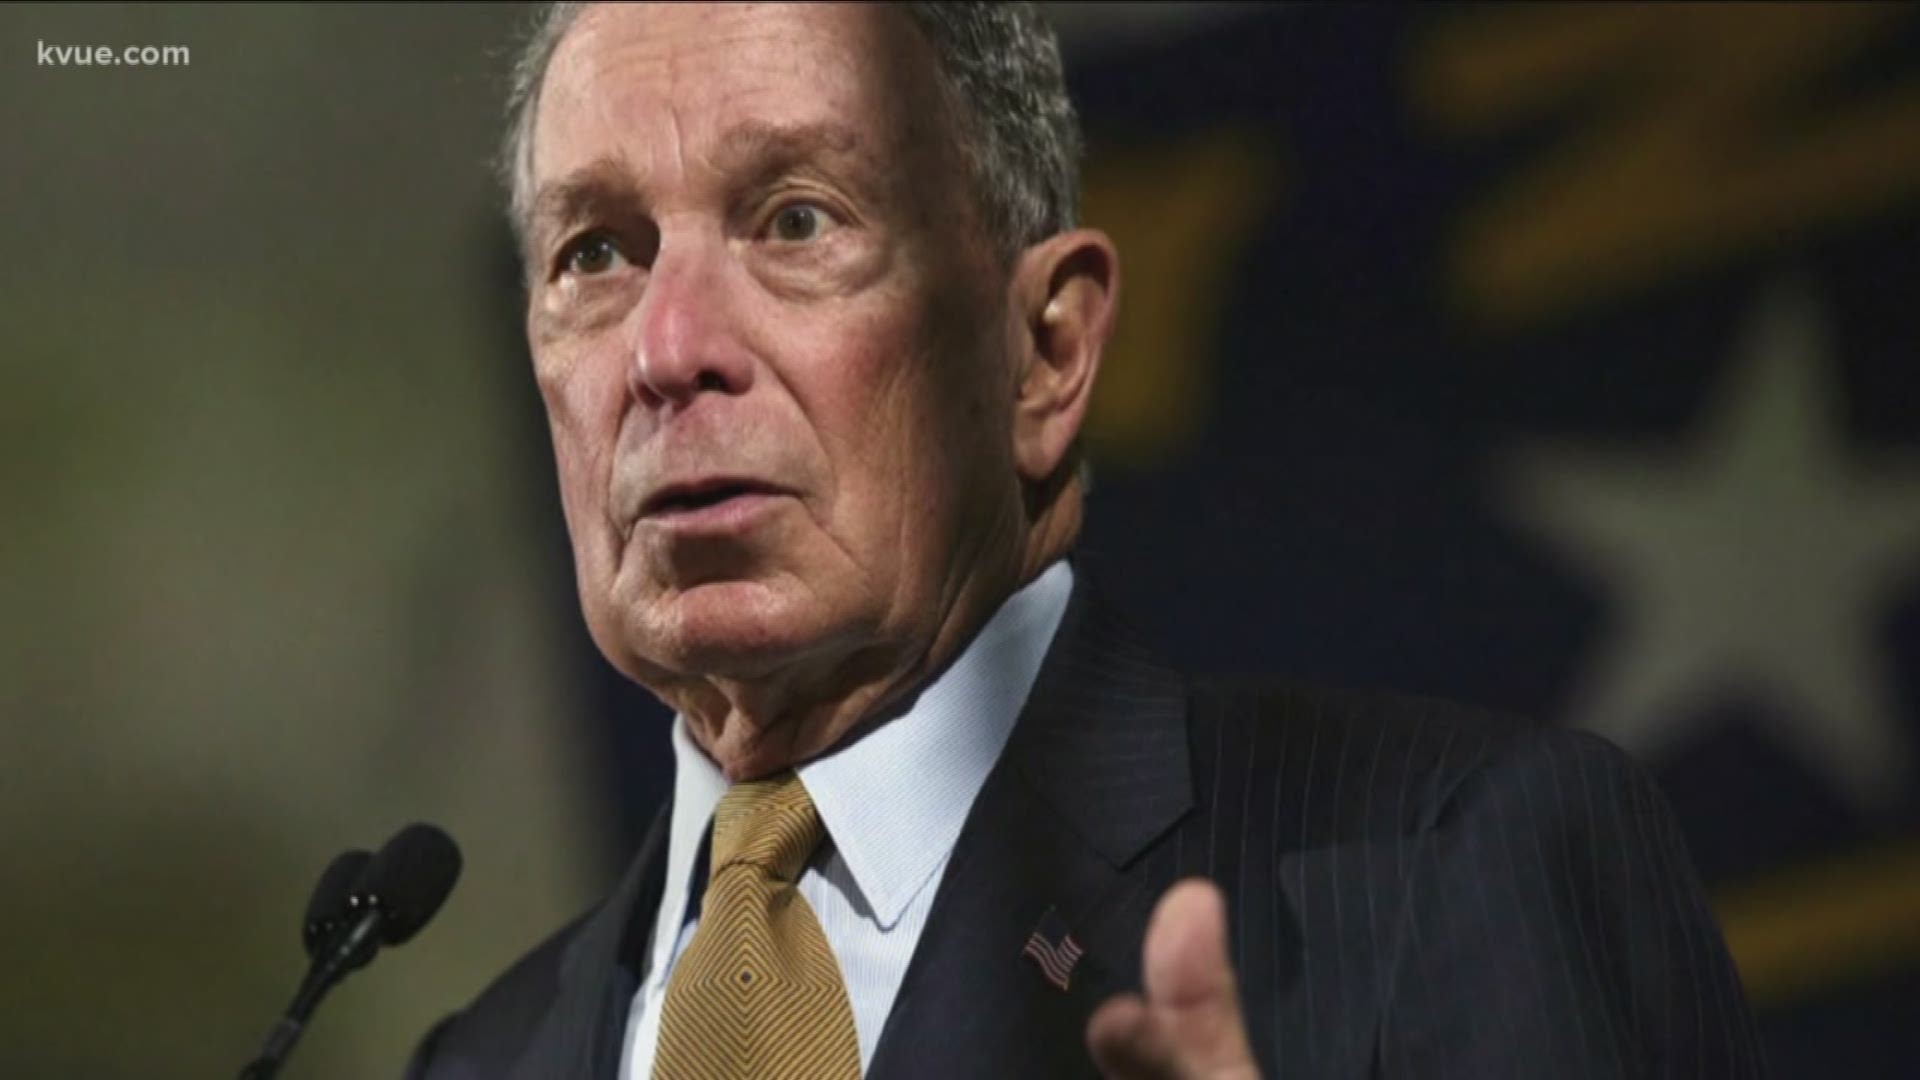 The former New York City mayor and billionaire will swing through the Lone Star State on Saturday, with stops in Austin, San Antonio and Dallas.